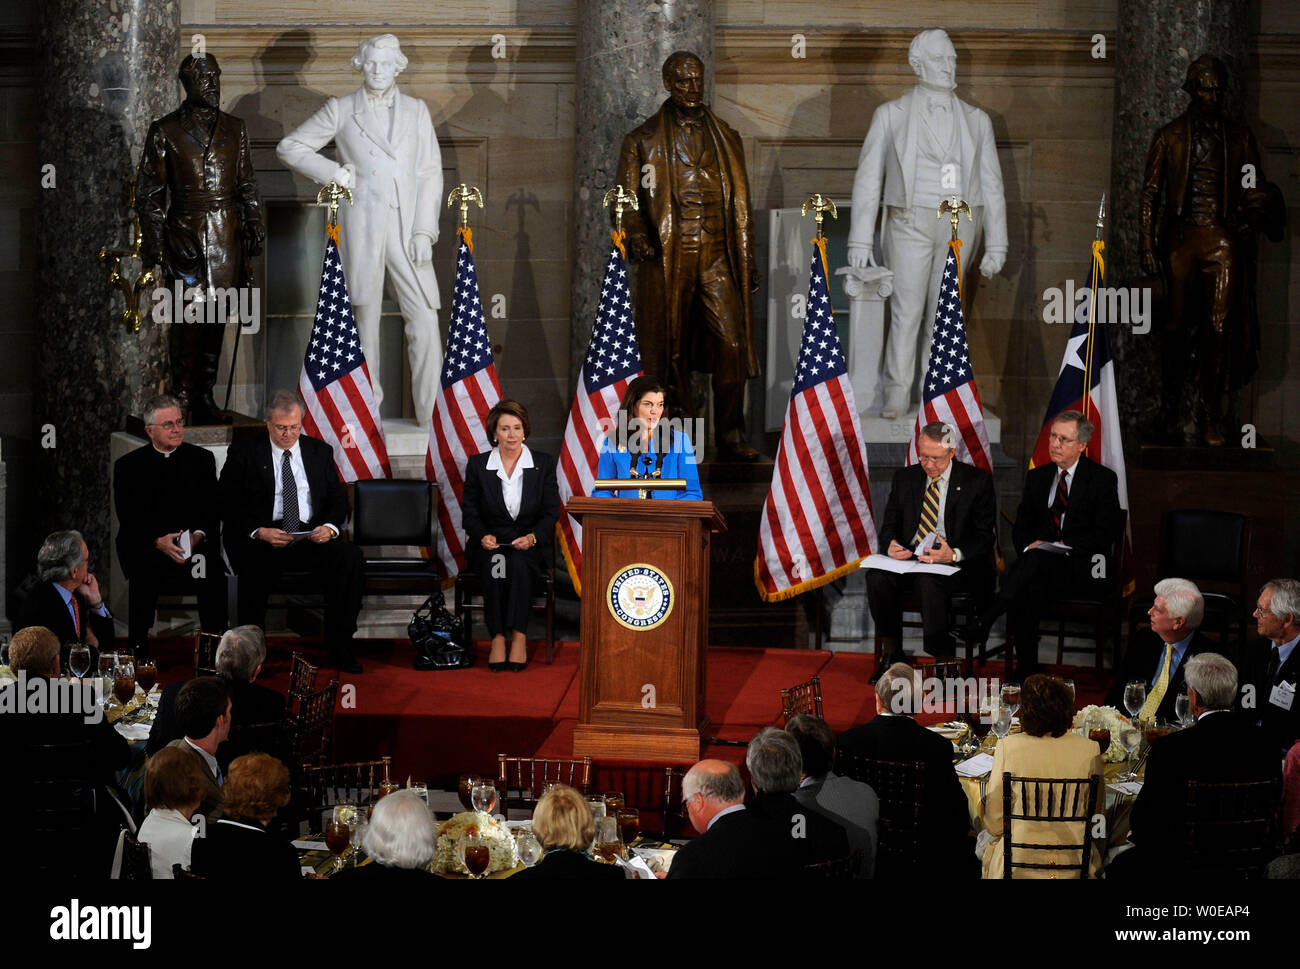 Luci Baines Johnson, daughter of President Johnson, delivers remarks during a luncheon ceremony to mark Lyndon B. Johnson's 100th birthday on Capitol Hill in Washington on May 21, 2008. Johnson was joined on stage by, from left to right, Rev. Daniel Coughlin, President of the Lyndon B. Johnson Foundation Tom Johnson, Speaker of the House Nancy Pelosi (D-CA), Senate Majority Leader Harry Reid (D-NV) and Senate Minority Leader Mitch McConnell. (R-KY)  (UPI Photo/Kevin Dietsch) Stock Photo